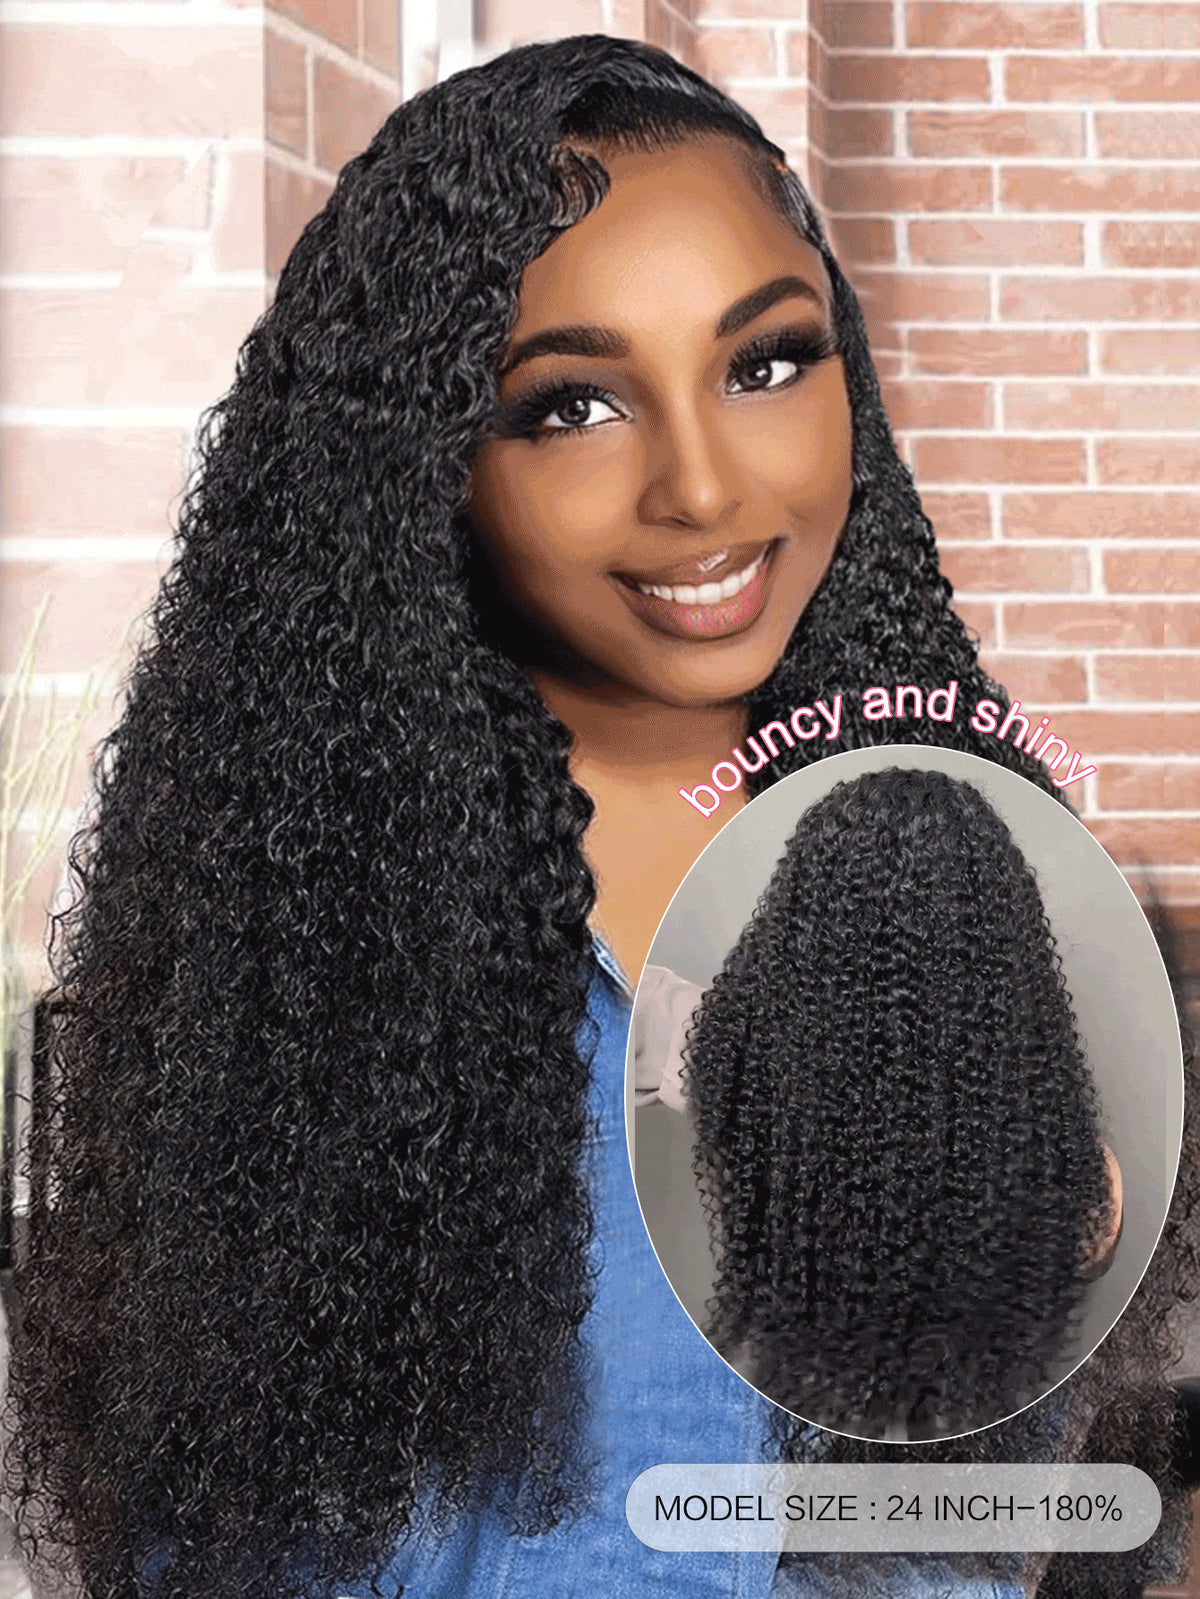 Transparent Lace Kinky Curly 13 X 4 Lace Frontal Wig 180% Density 12-26 Inch Natural Black Color Pre-Plucked Natural Hairline Lace Human Hair Top Quality Wig for Women